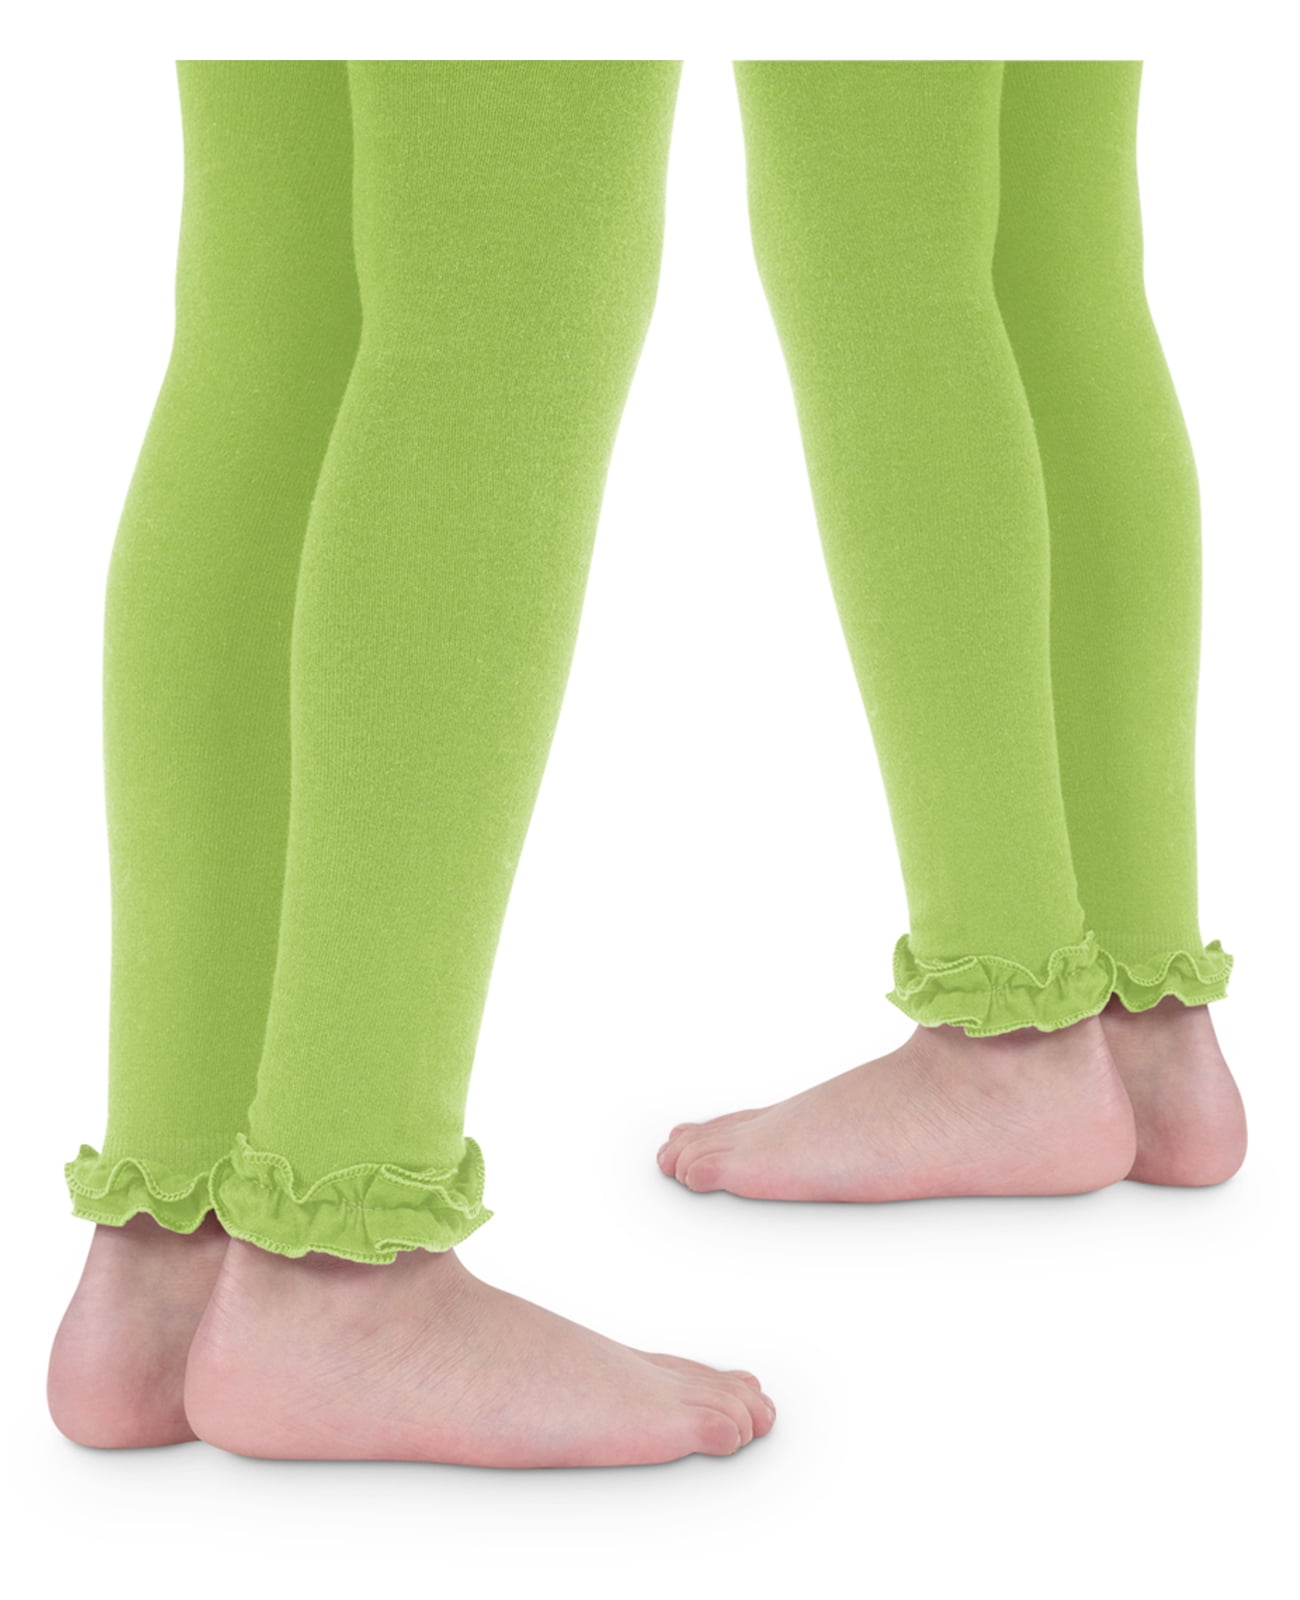 JEFFERIES Pima Cotton Footless Ruffle Ankle Length Tights fits 2 to 10 years 